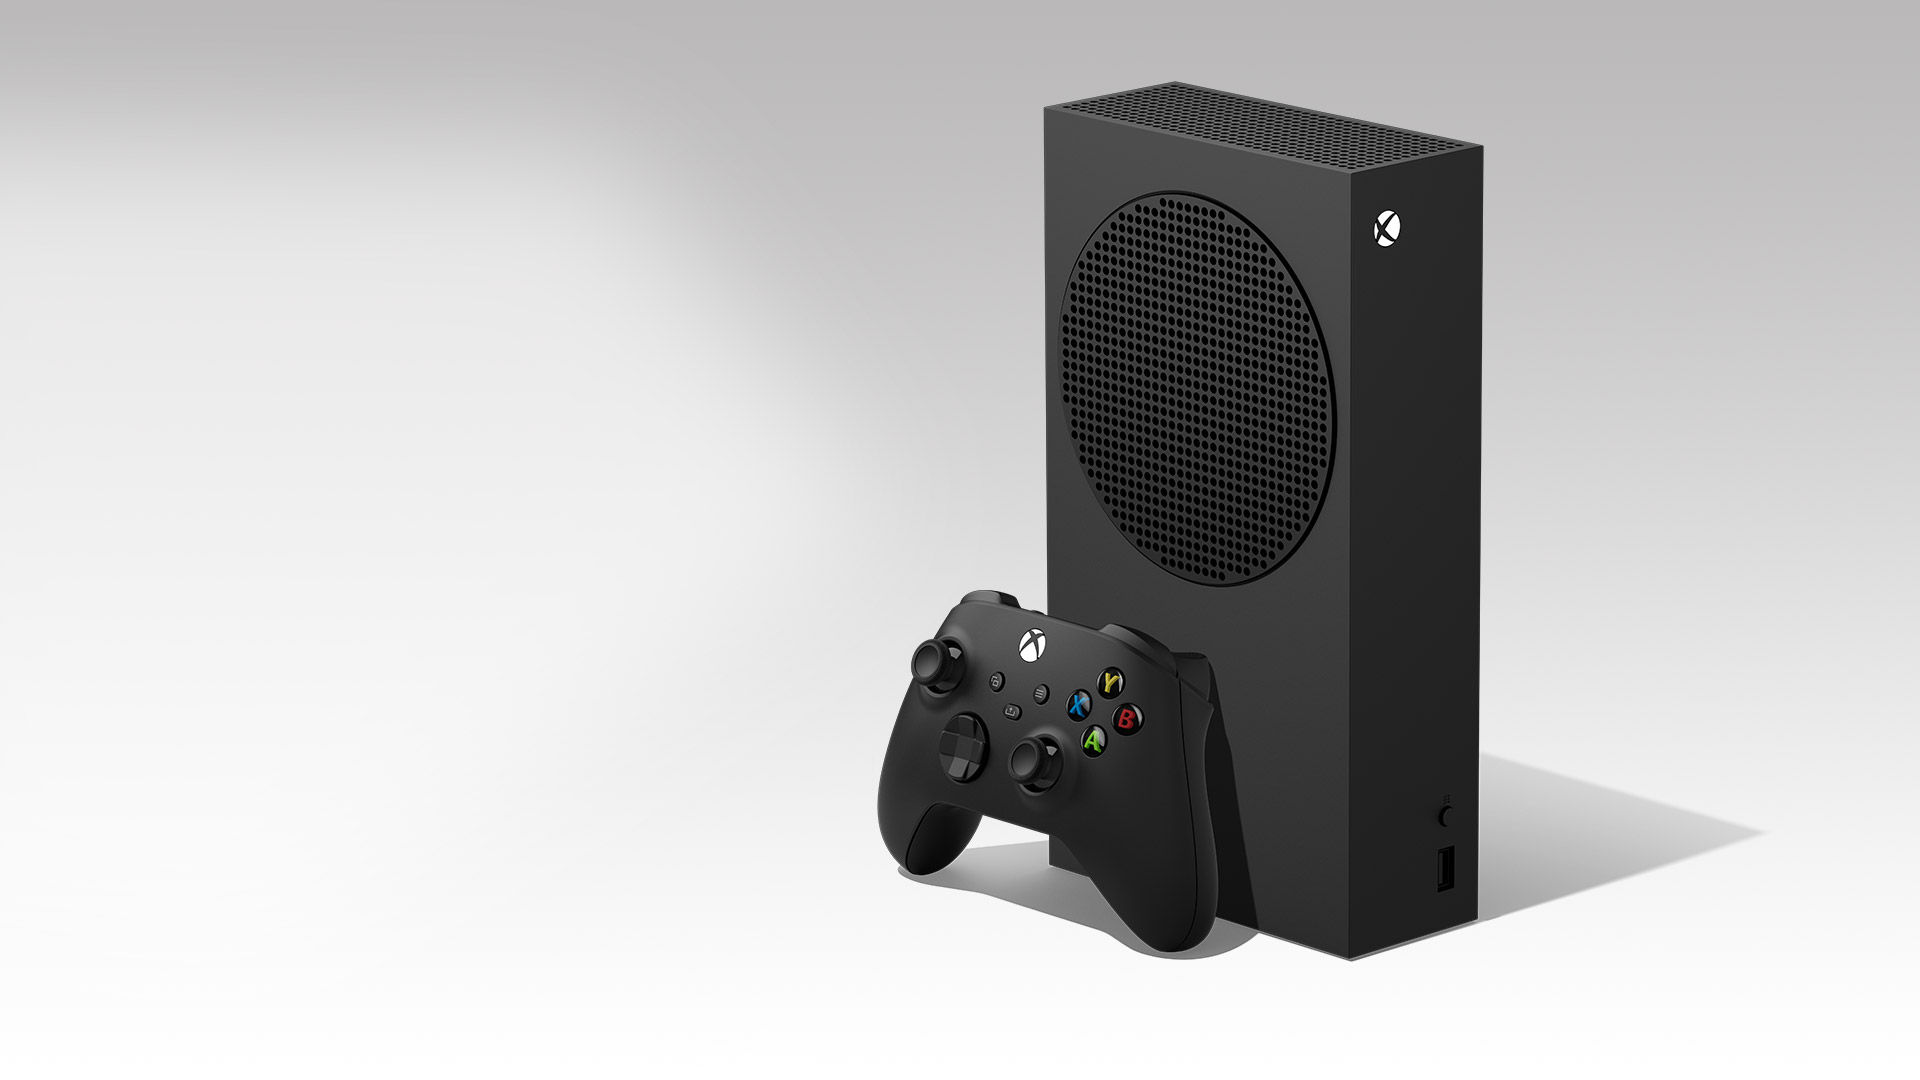 Microsoft Xbox One X India price and release date revealed